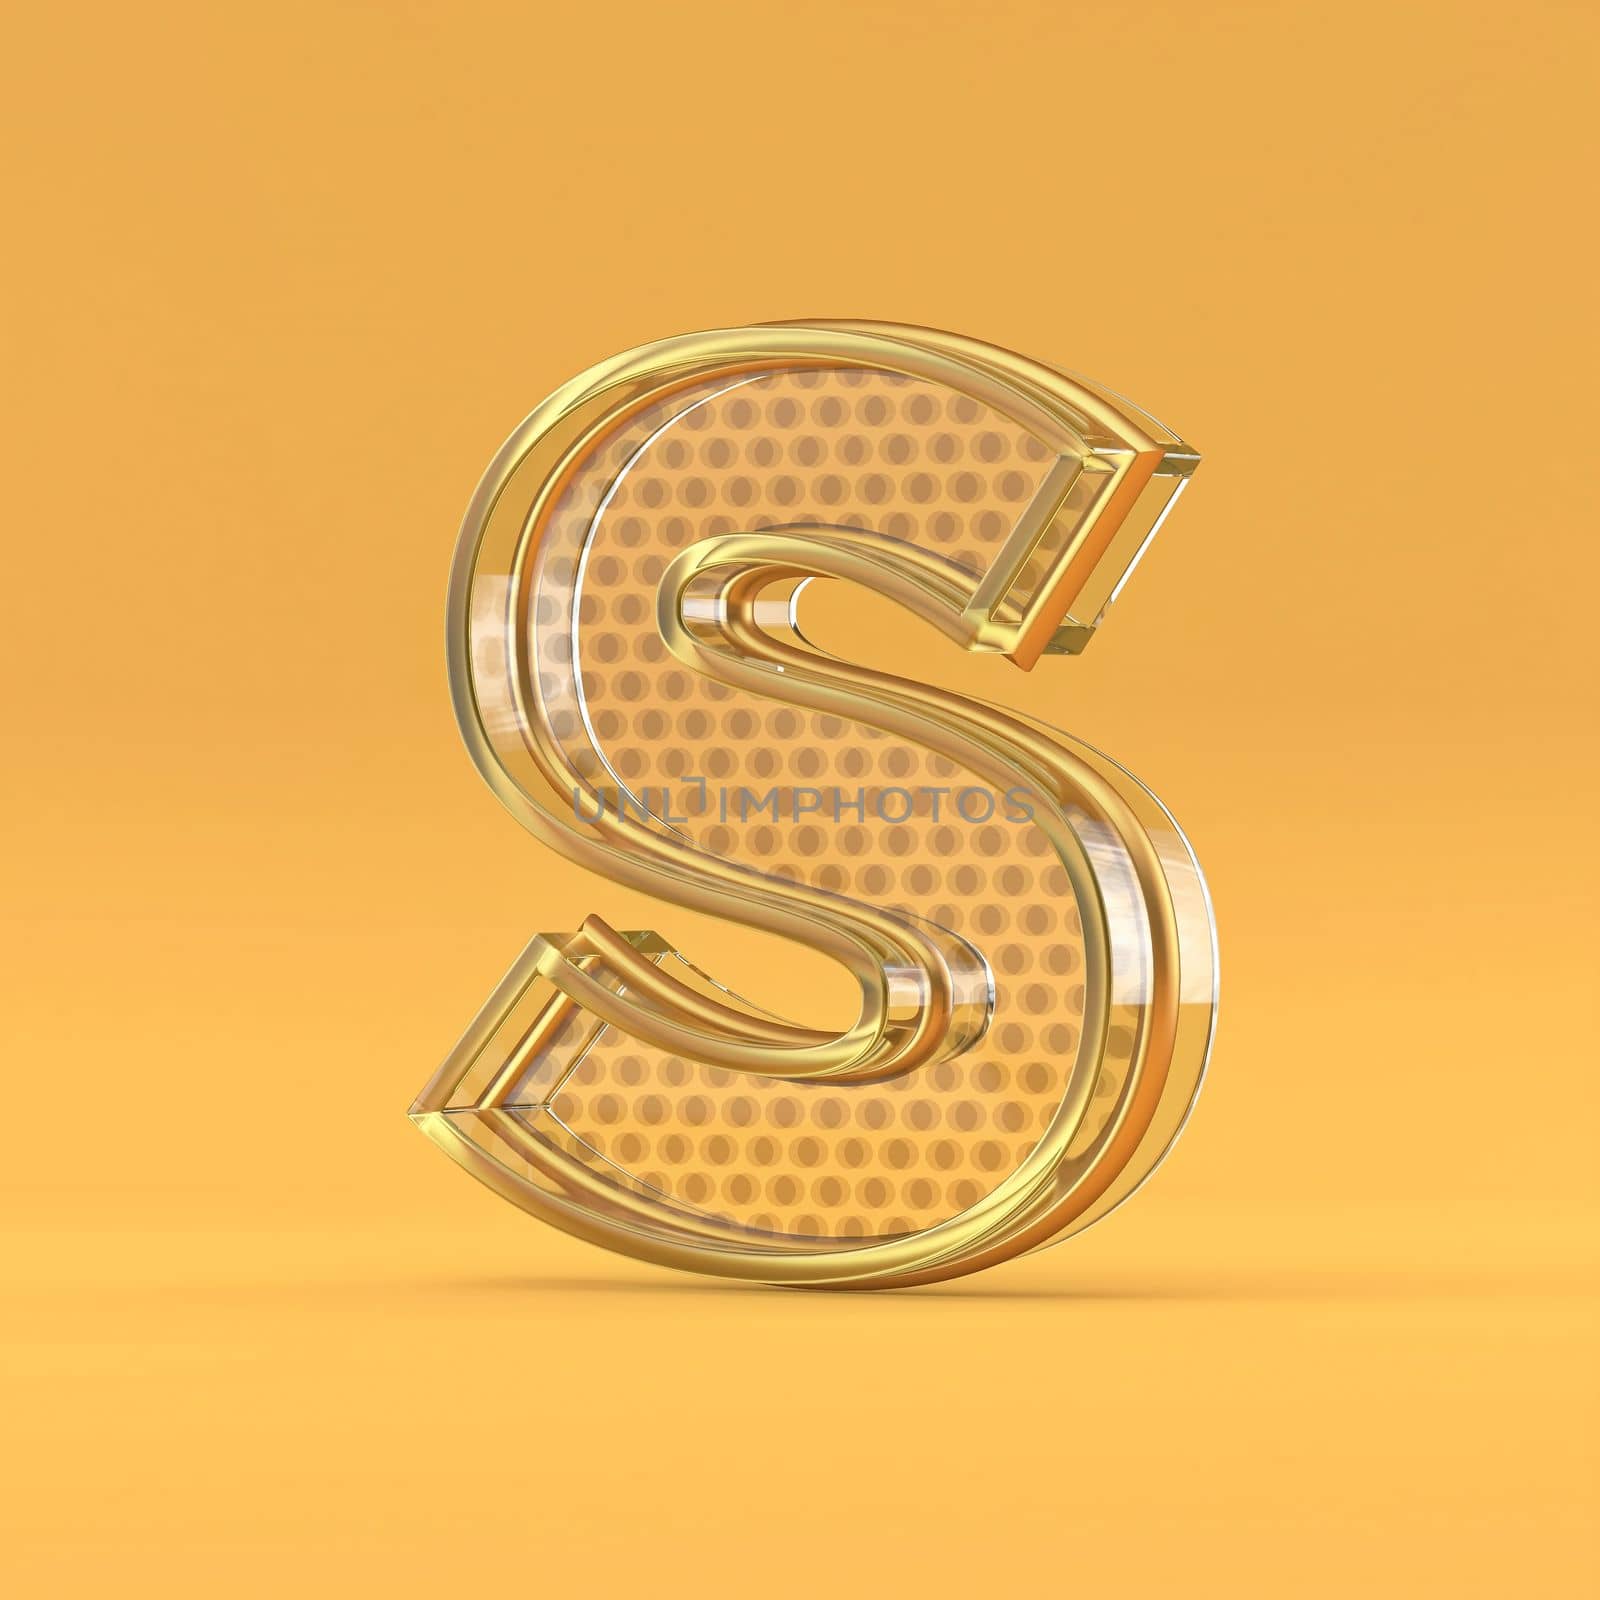 Gold wire and glass font letter S 3D rendering illustration isolated on orange background